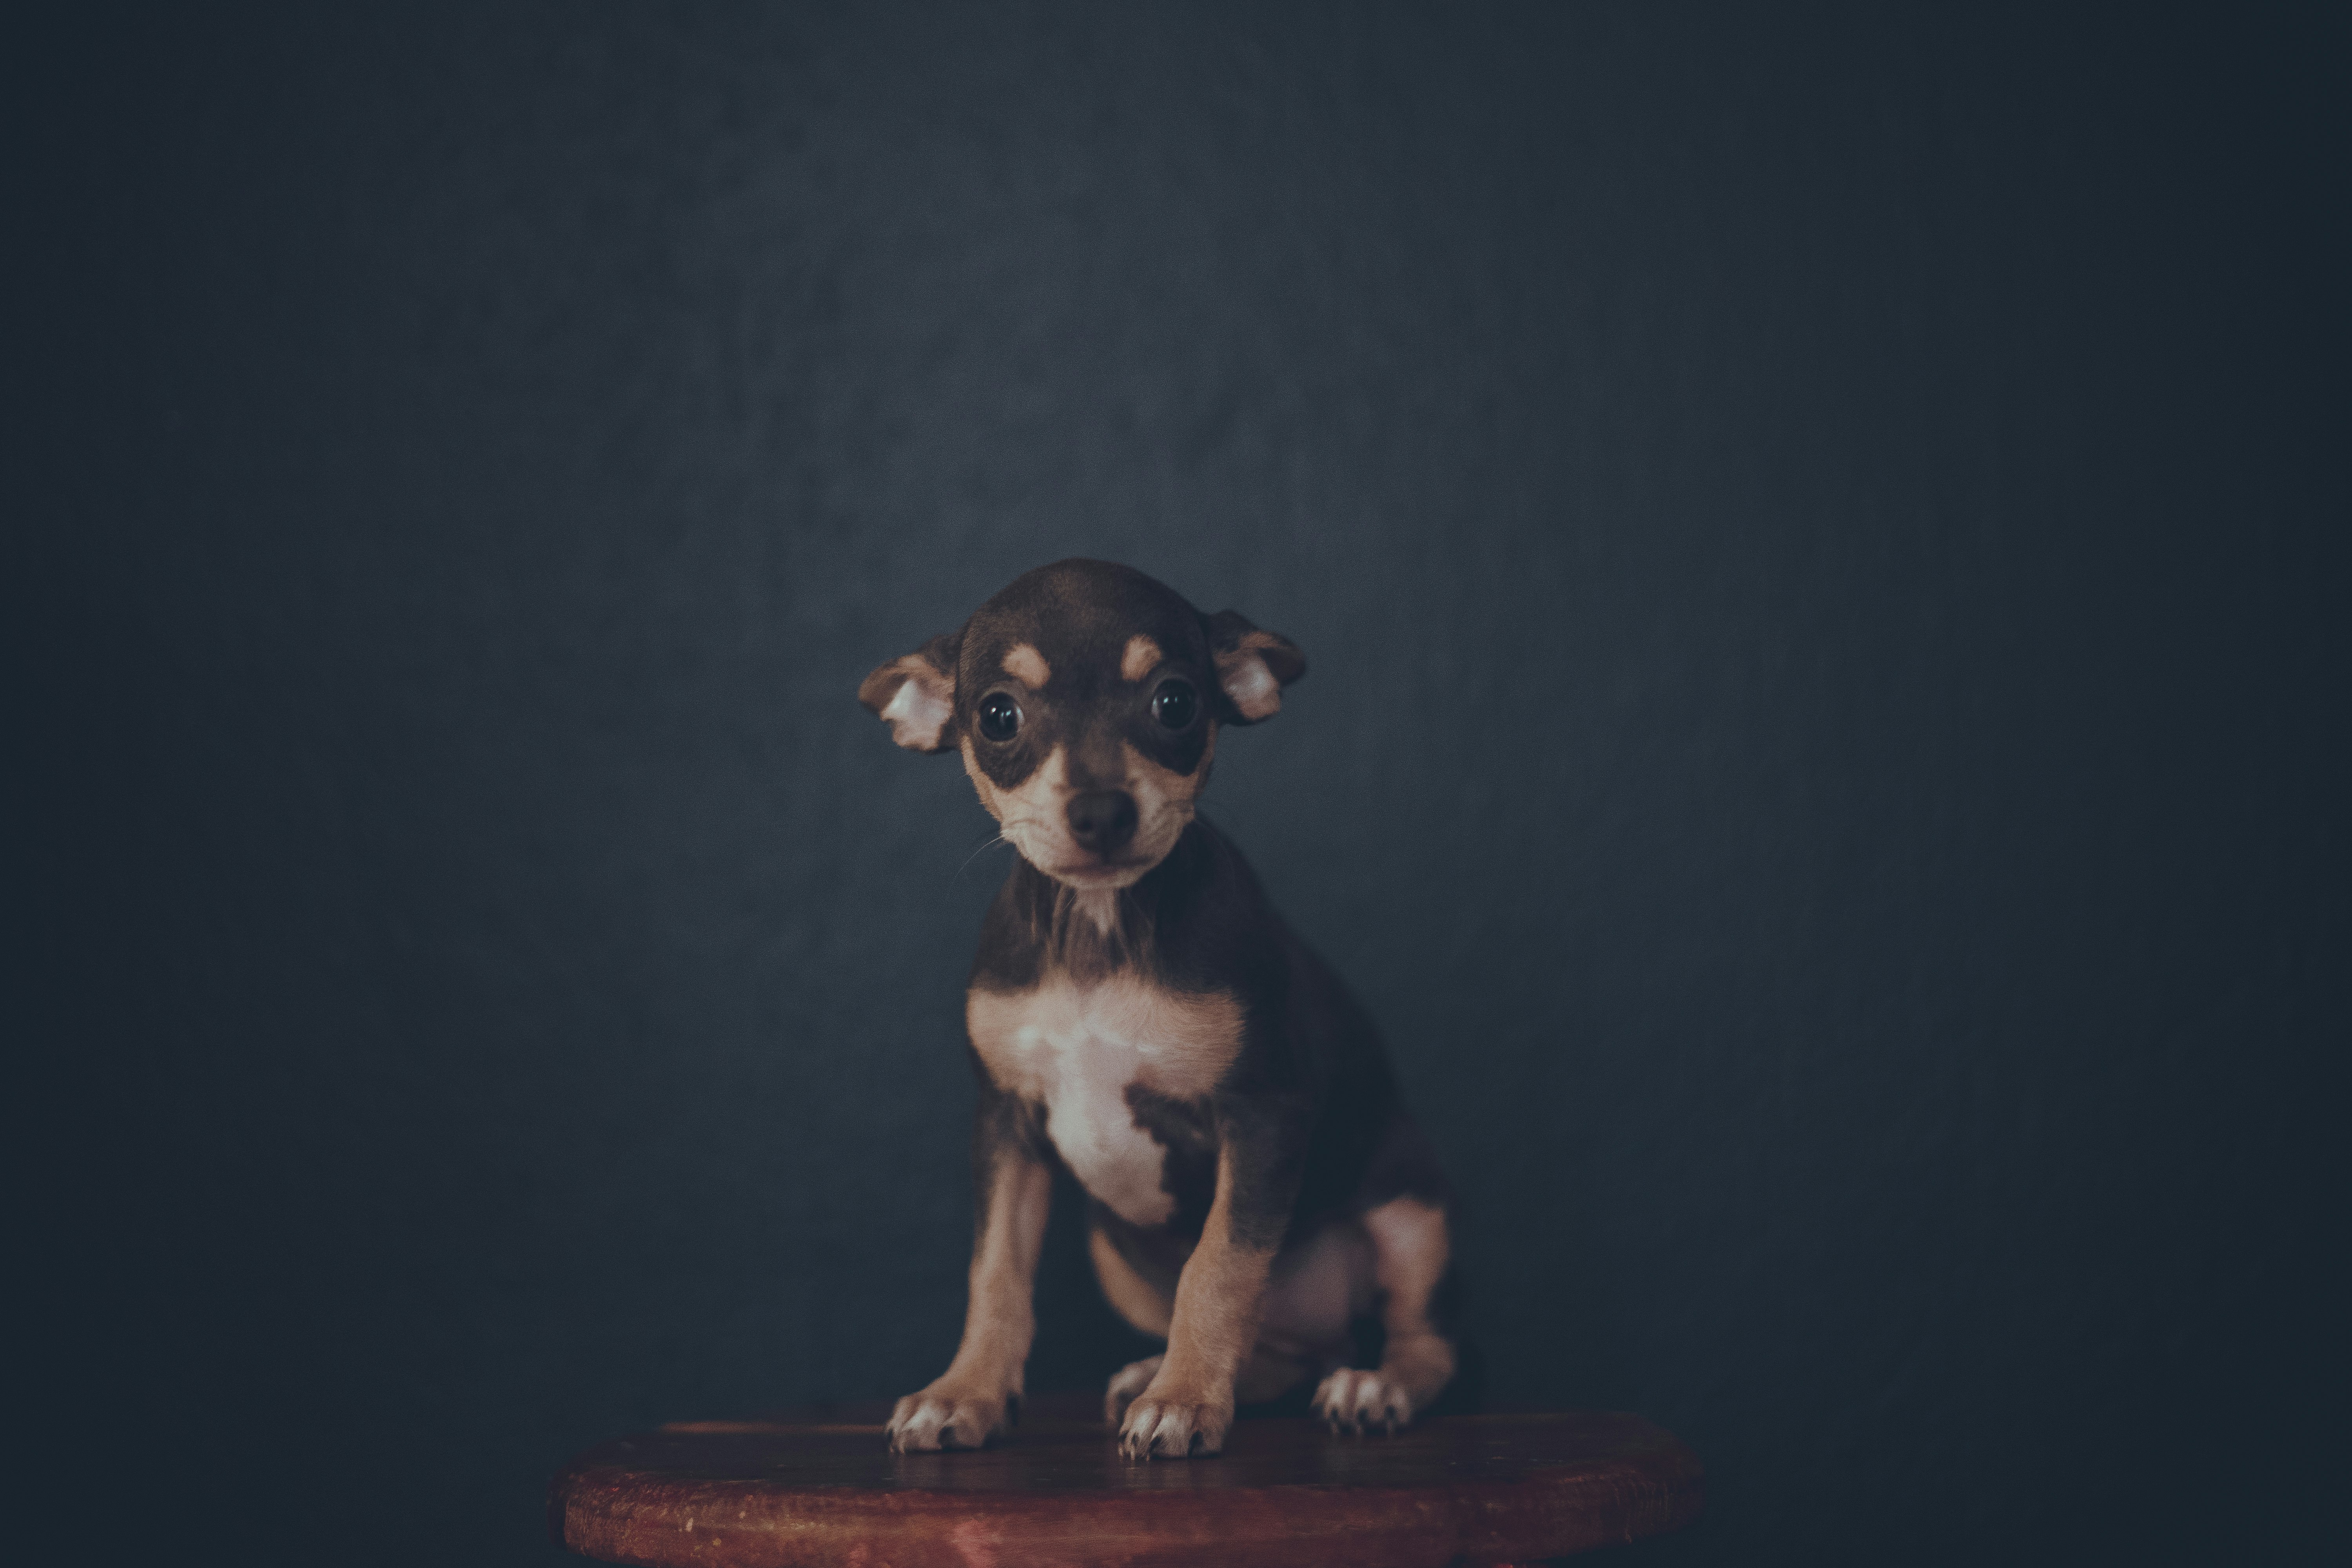 black and brown short coated small dog sitting on brown wooden seat